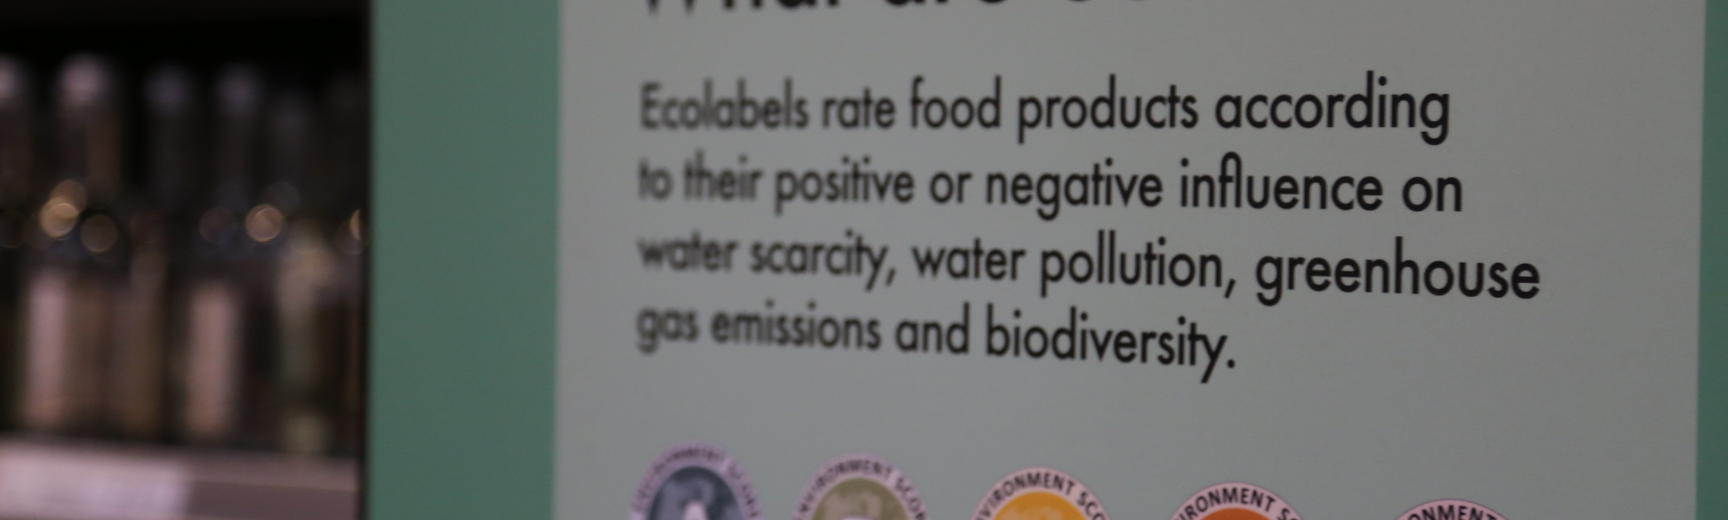 Information about ecolabels on a banner in the cafe